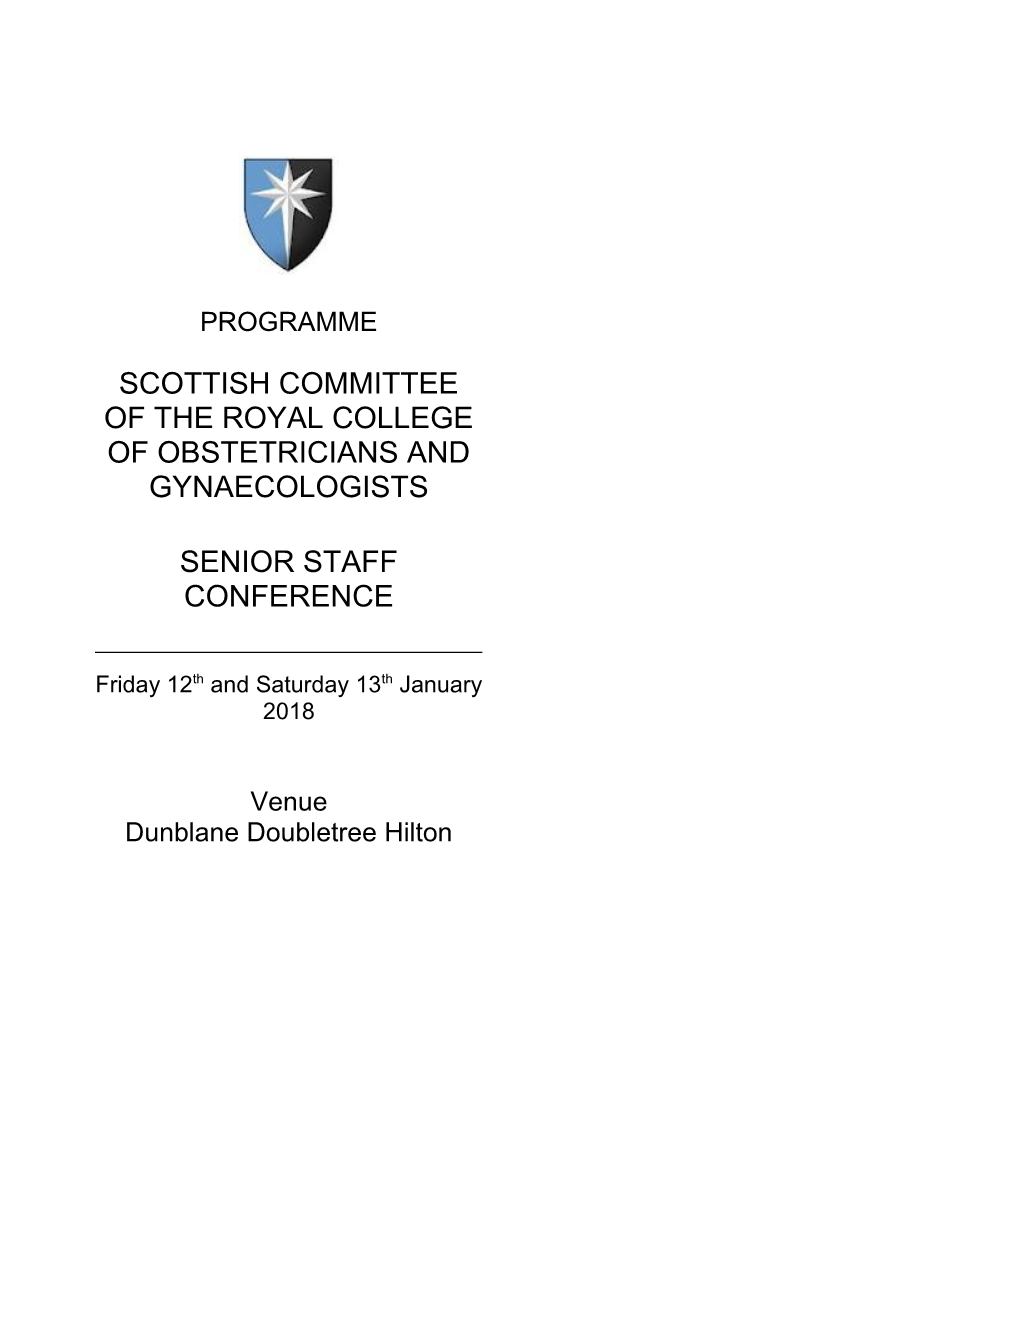 Scottish Committee of the Royal College of Obstetricians and Gynaecologists